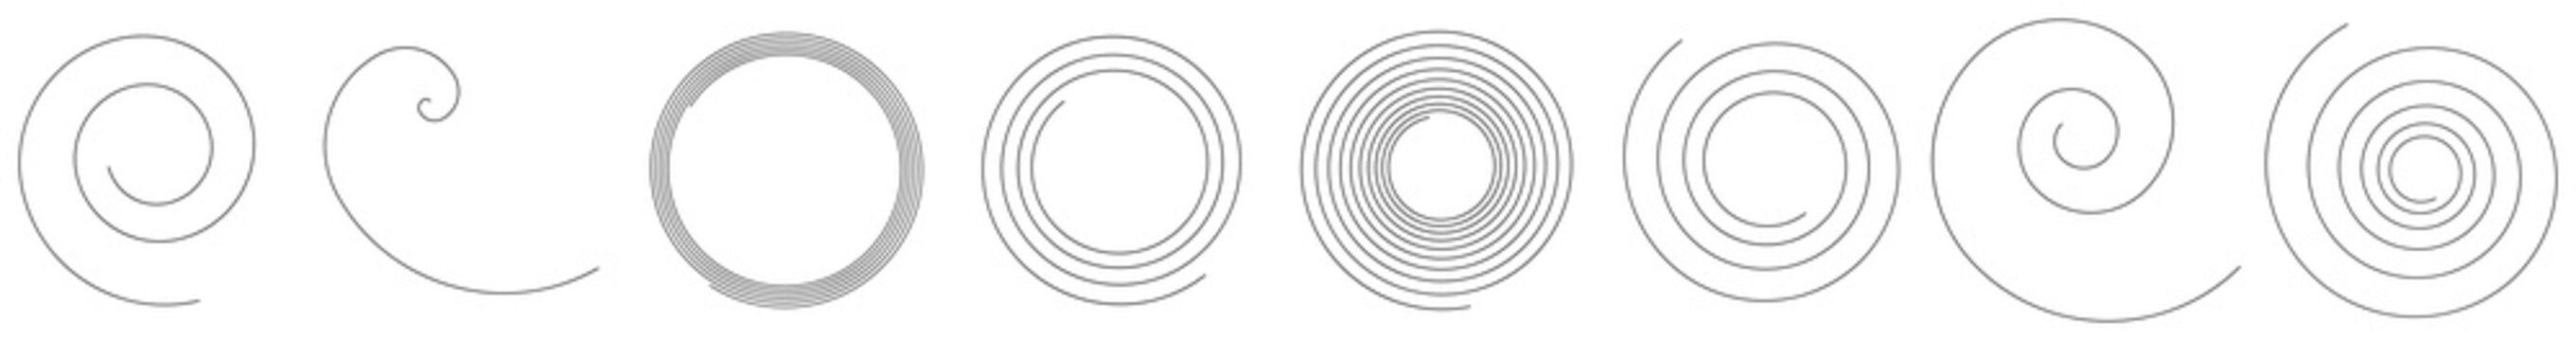 Spiral, swirl, twirl, volute design element with thin lines. Circular curved line element